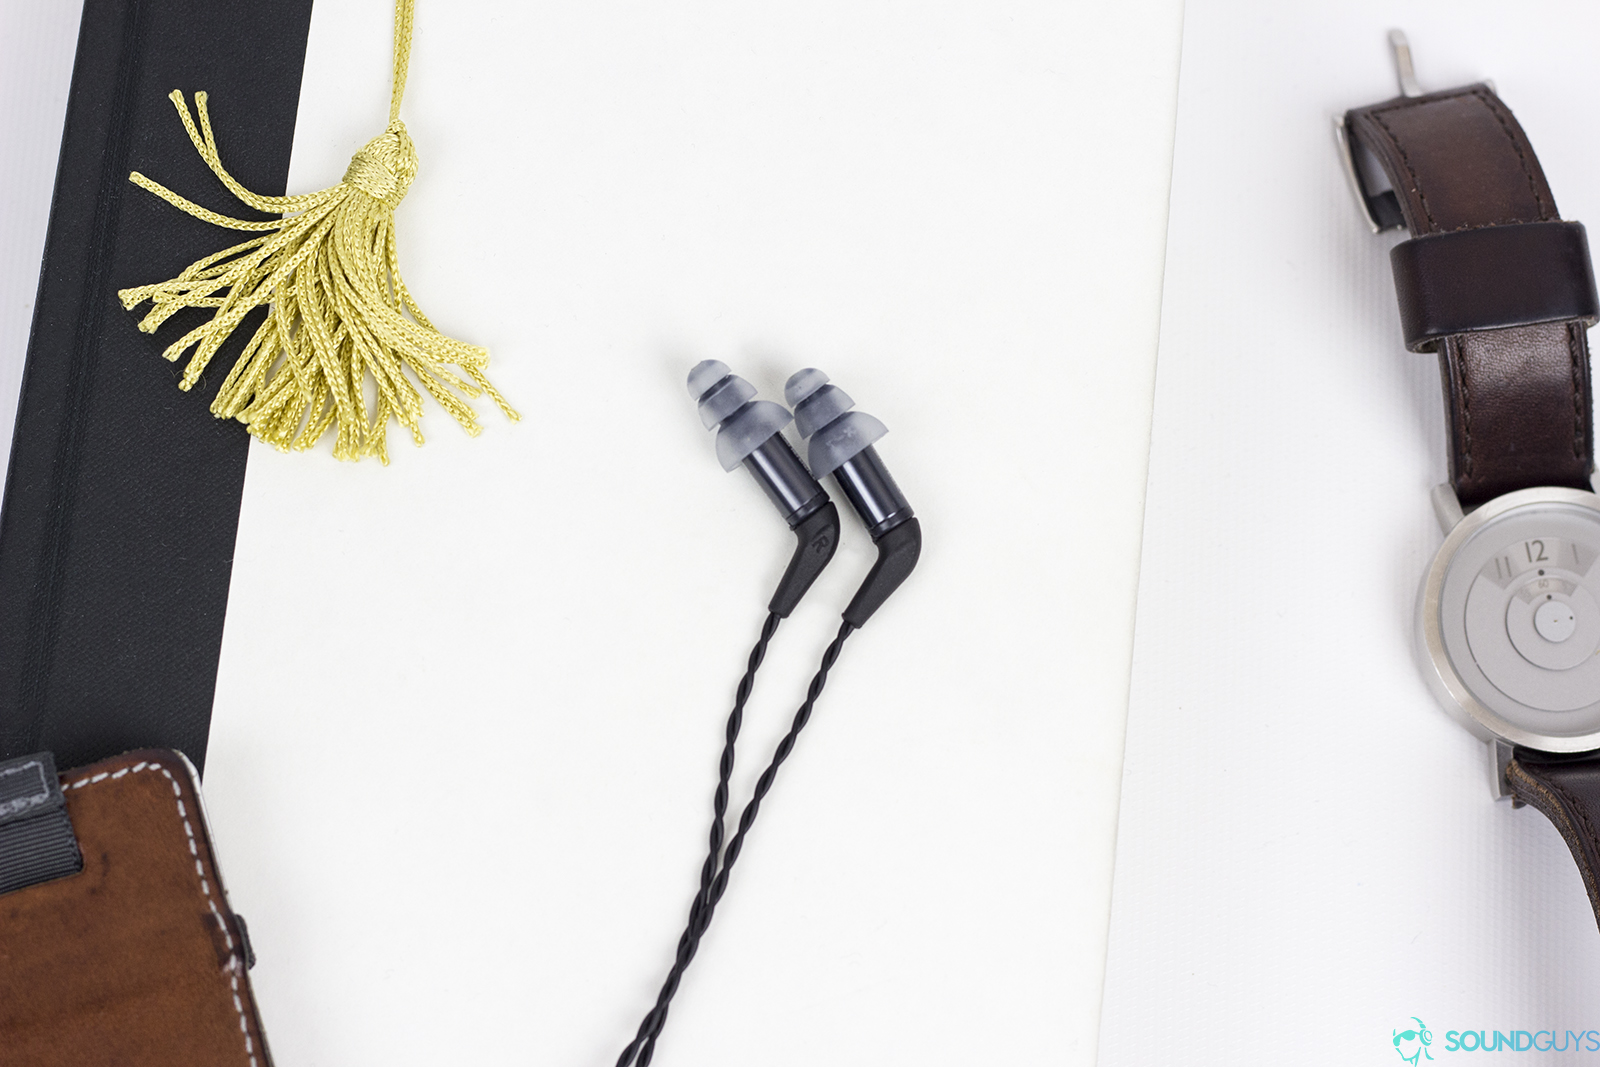 An image of the Eymotic ER4SR in-ears on a white surface next to a bookmark and watch.